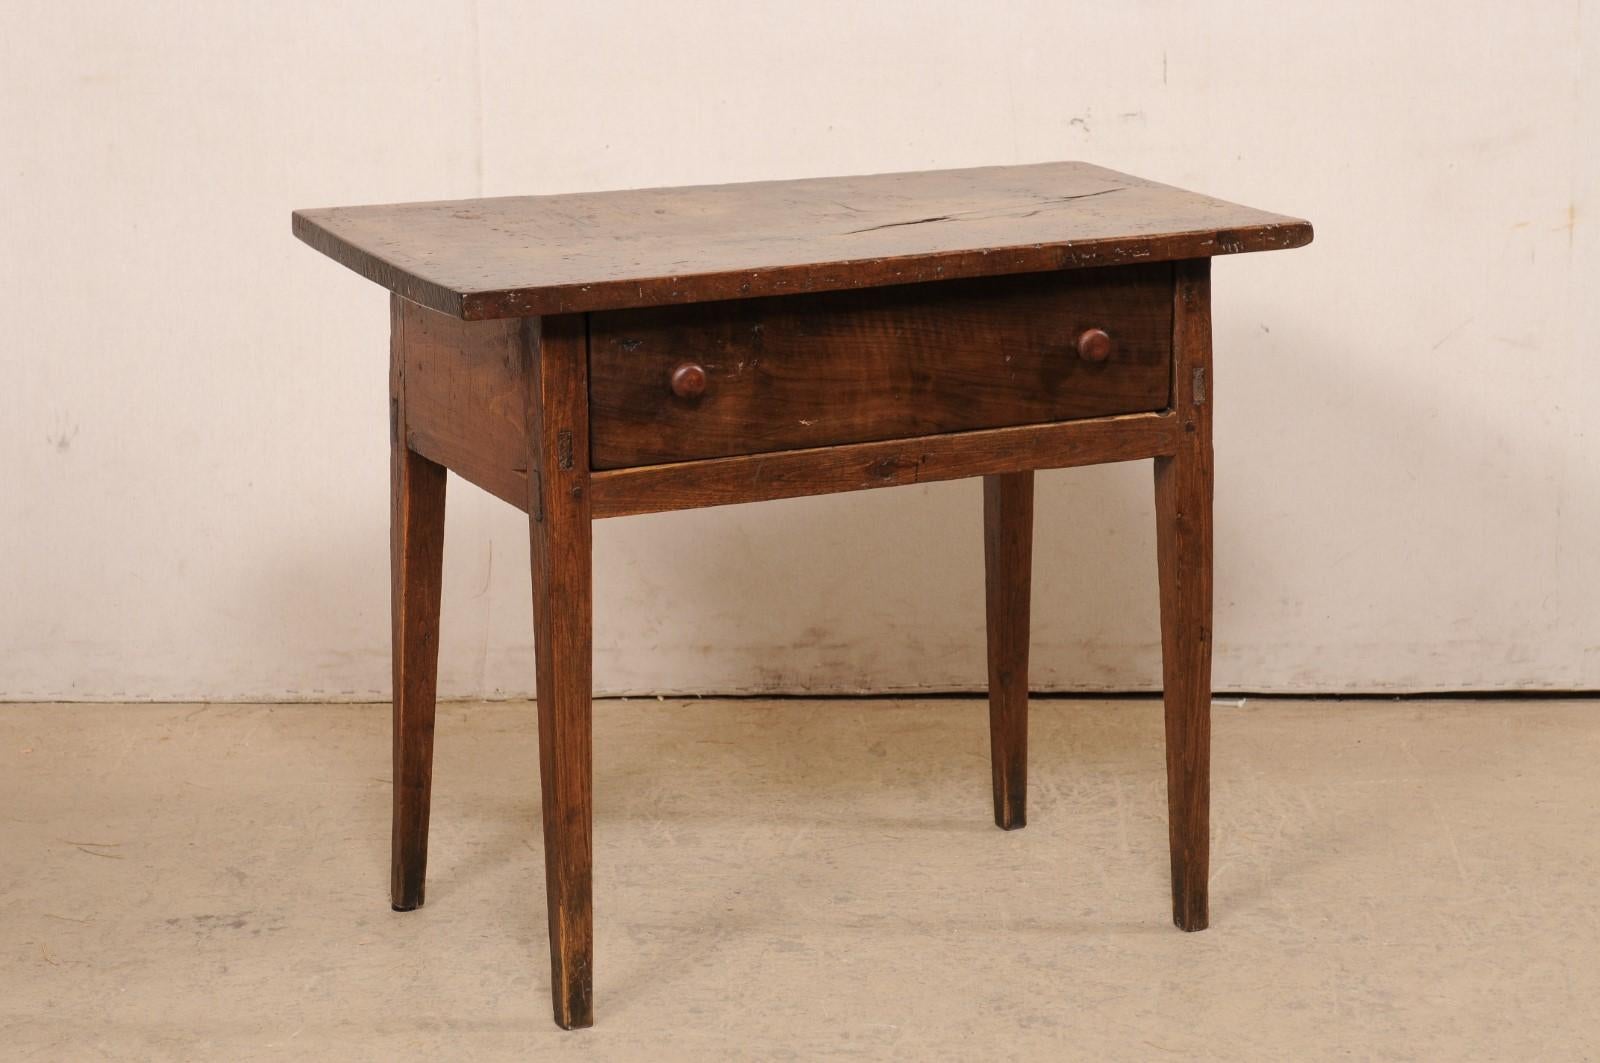 A Spanish carved-walnut wood occasional table with single drawer, from the 18th century. This antique table from Spain, designed with clean lines, has a rectangular-shaped top, which overhang the apron below that houses a single drawer at one long